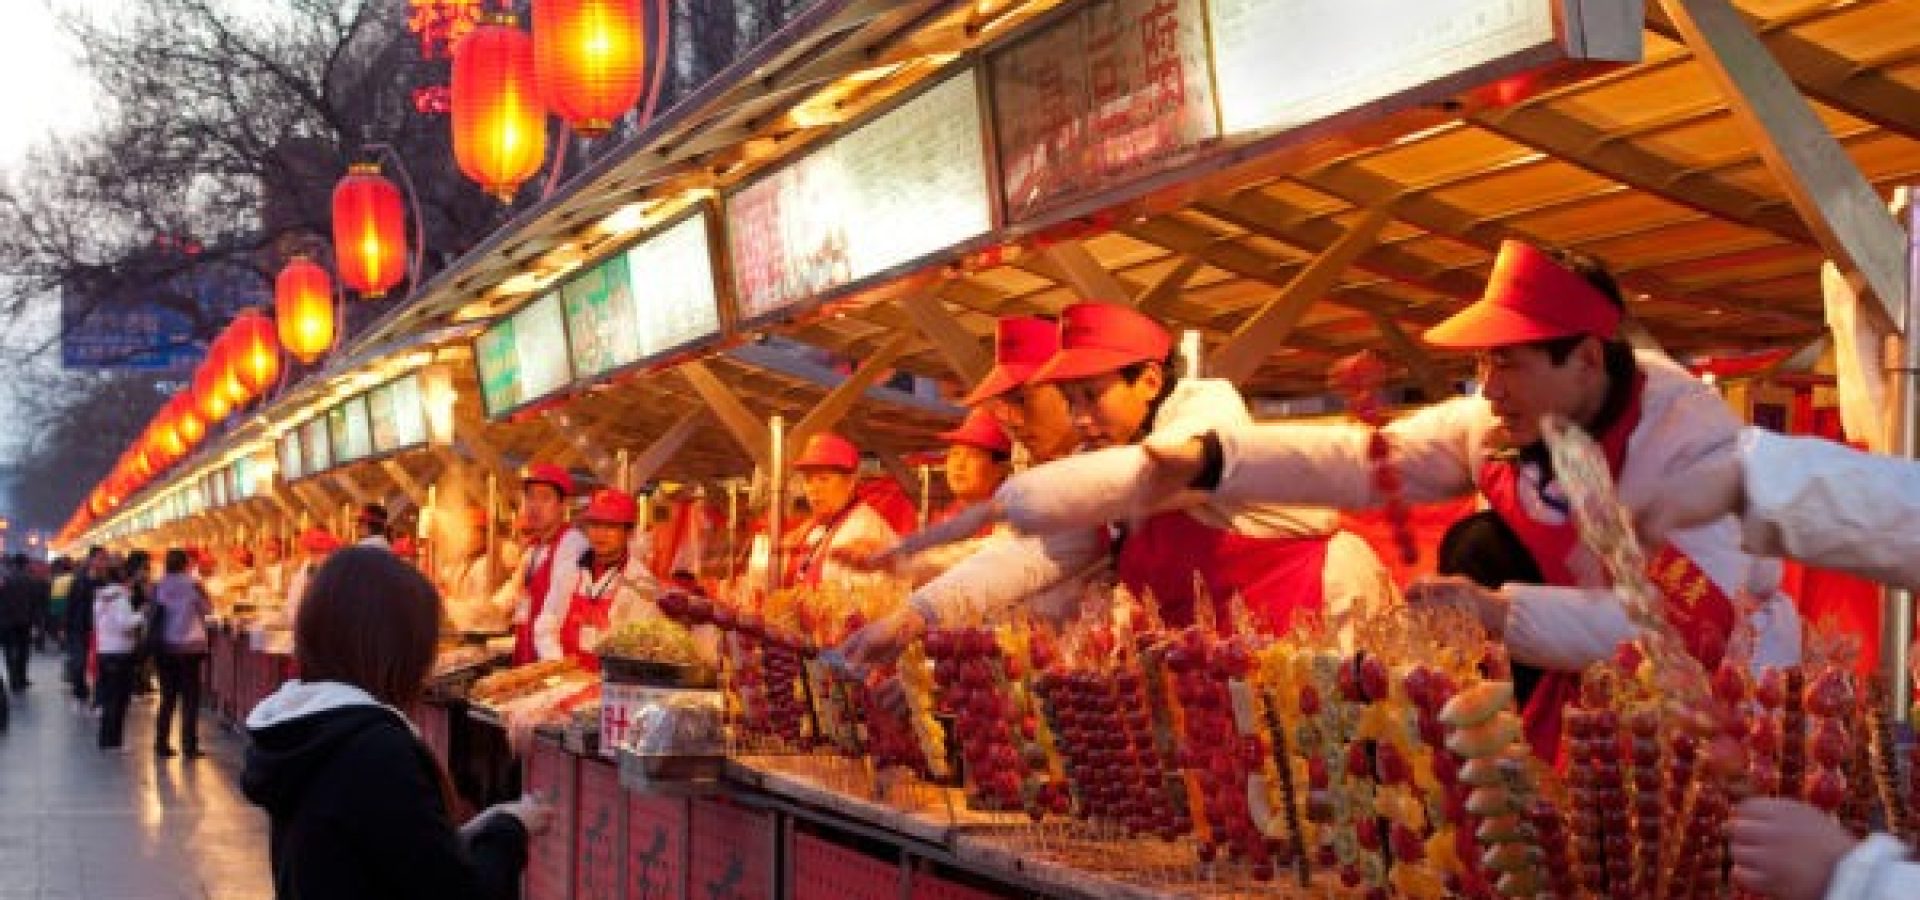 Wibest – Food Sector: Food stalls in Beijing, China./cereal